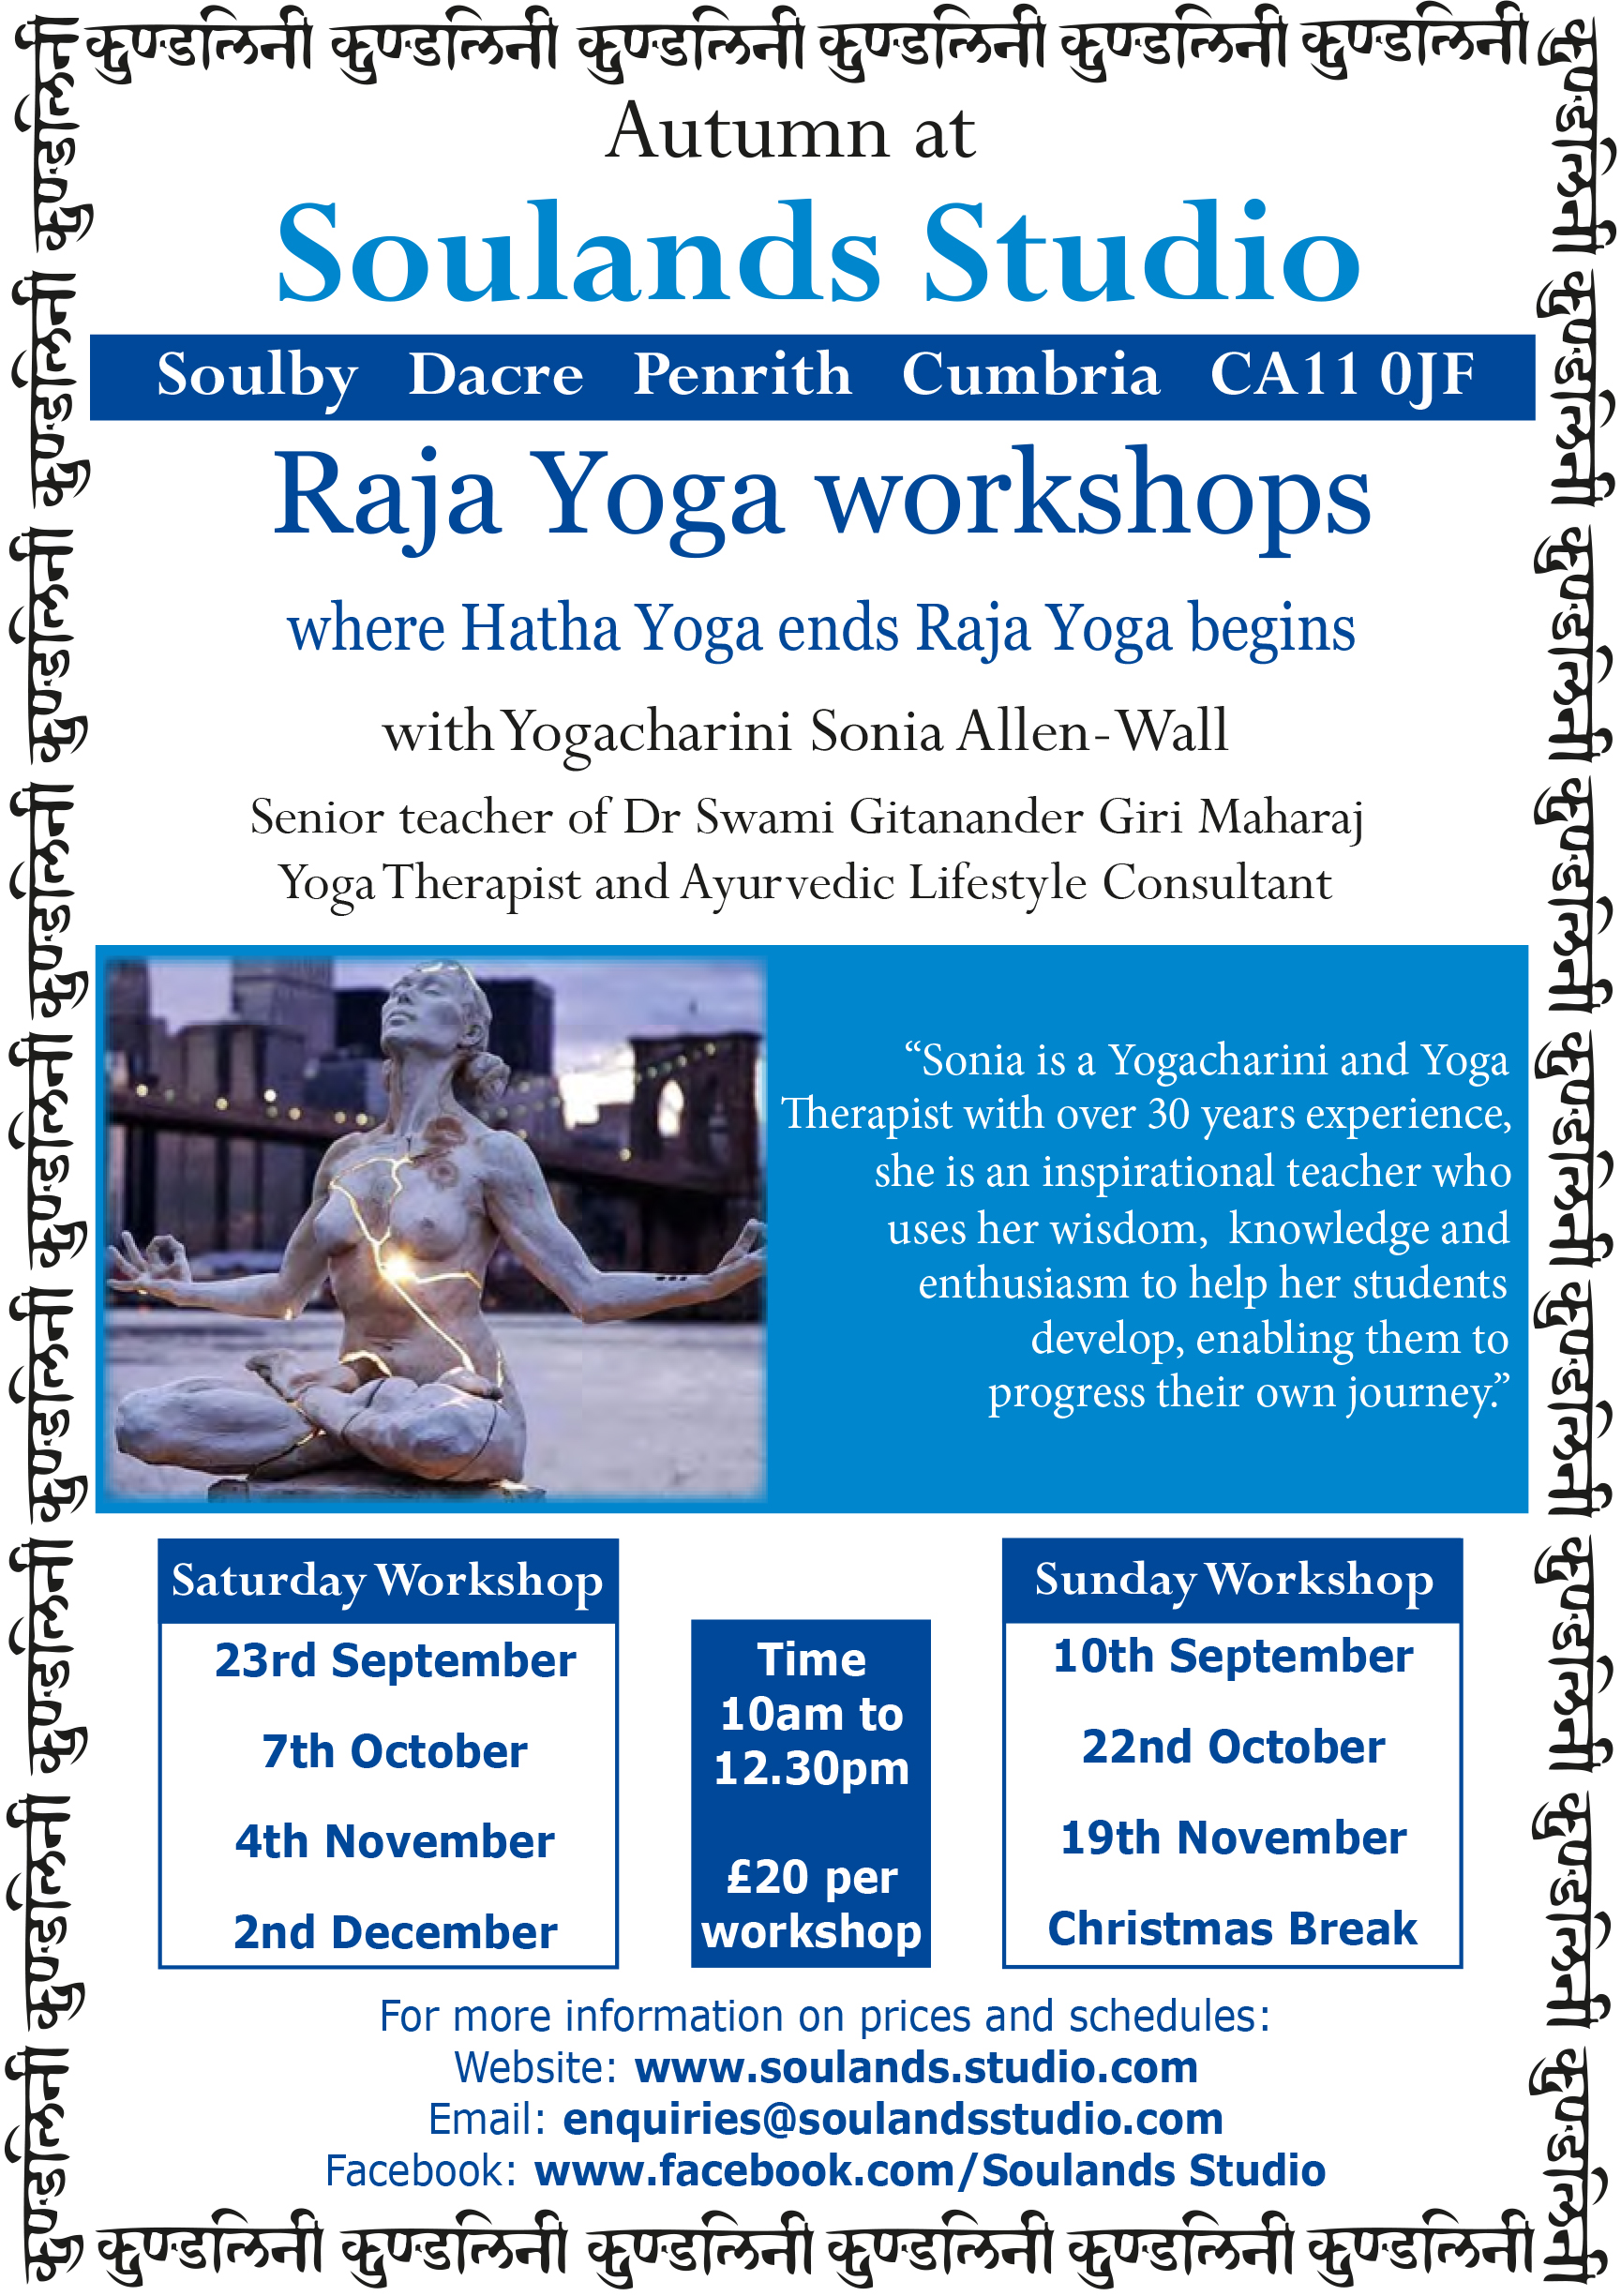 Raja Yoga group at Soulands Studio with Sonia Allen-Wall